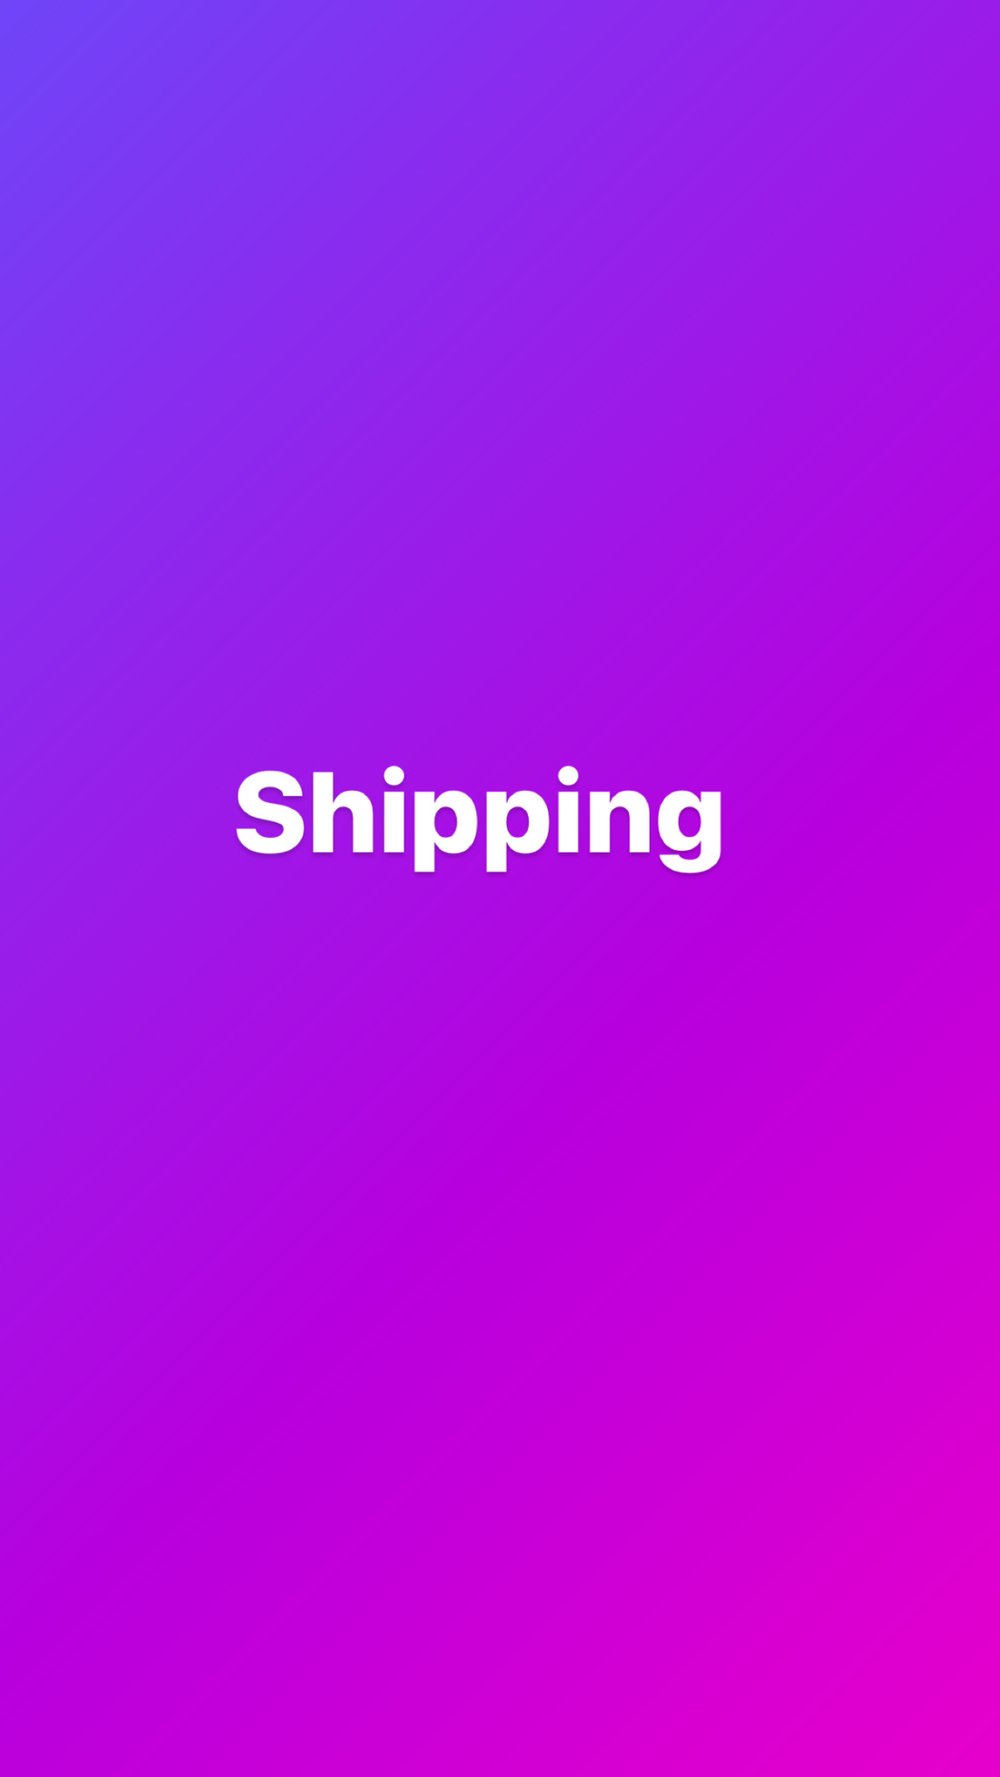 Image of payments and shipping  